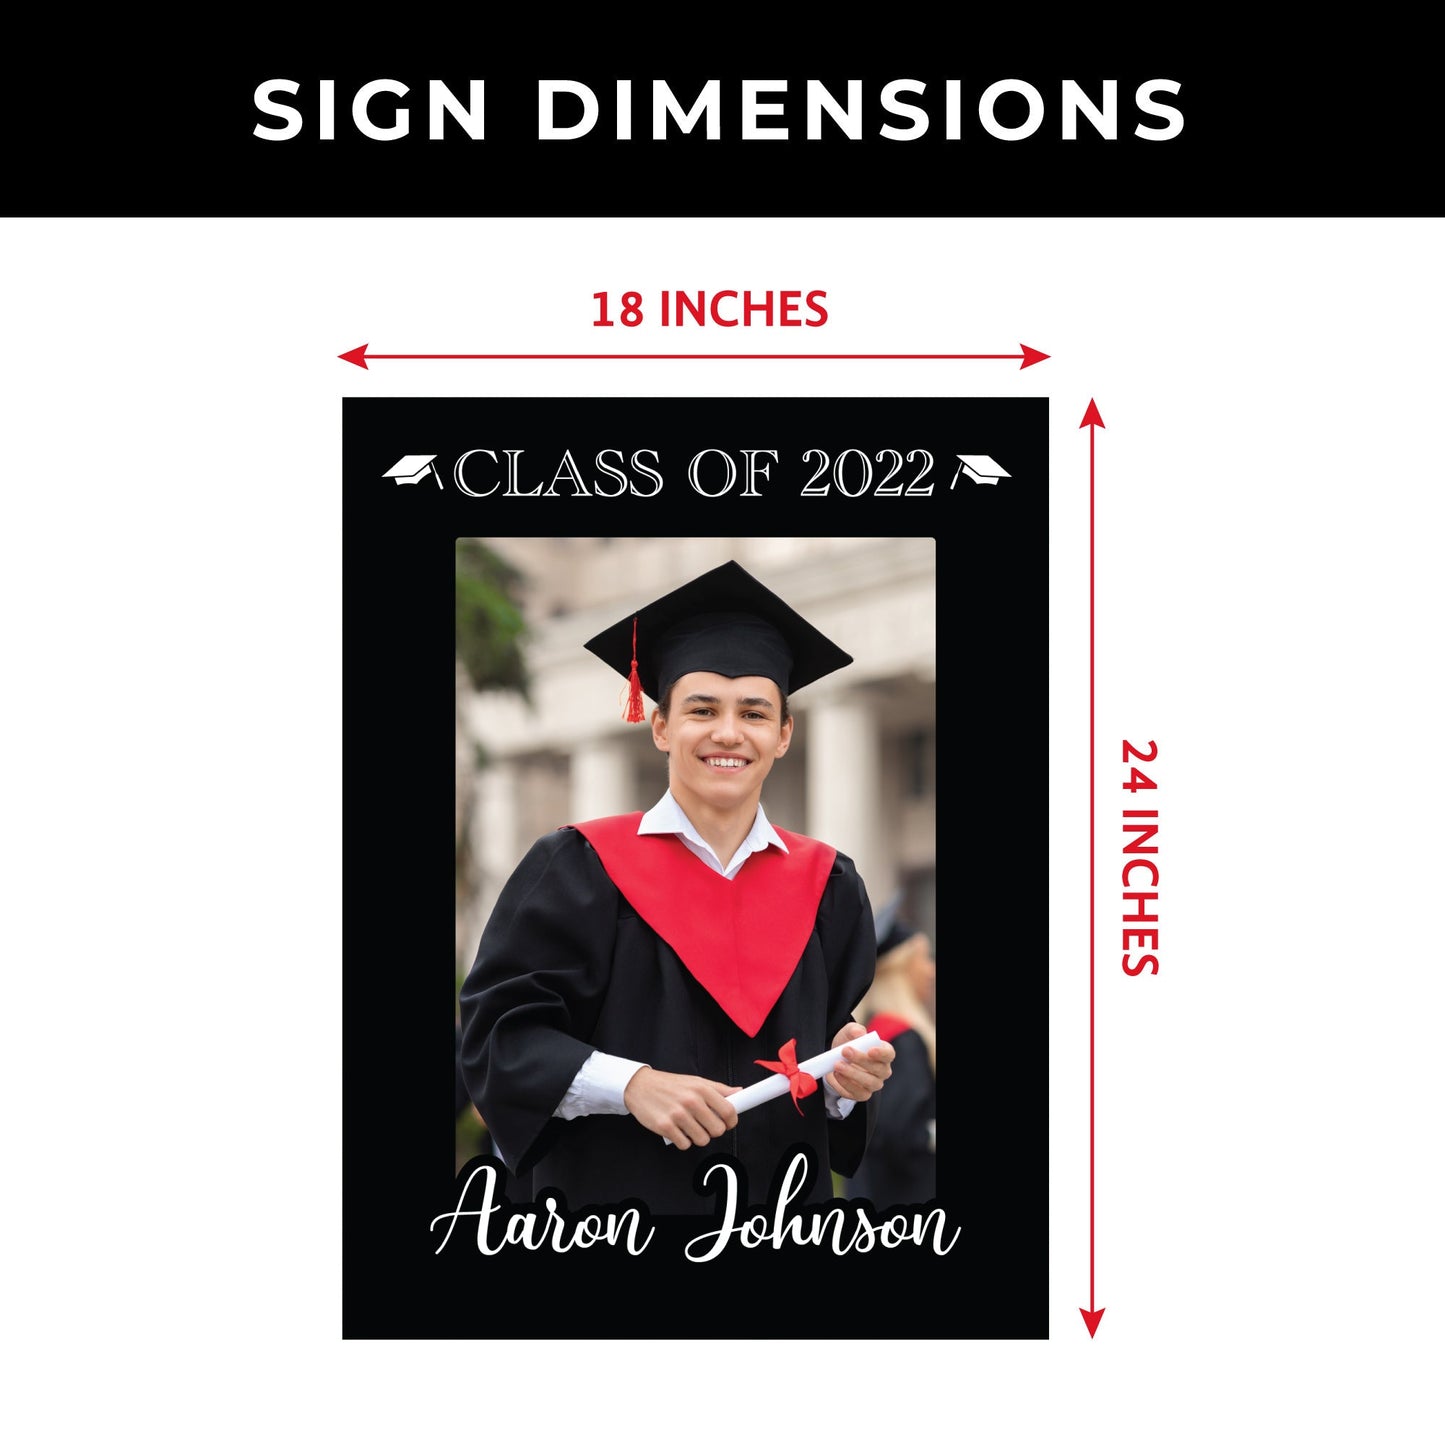 Personalized Graduation Welcome Sign With Image